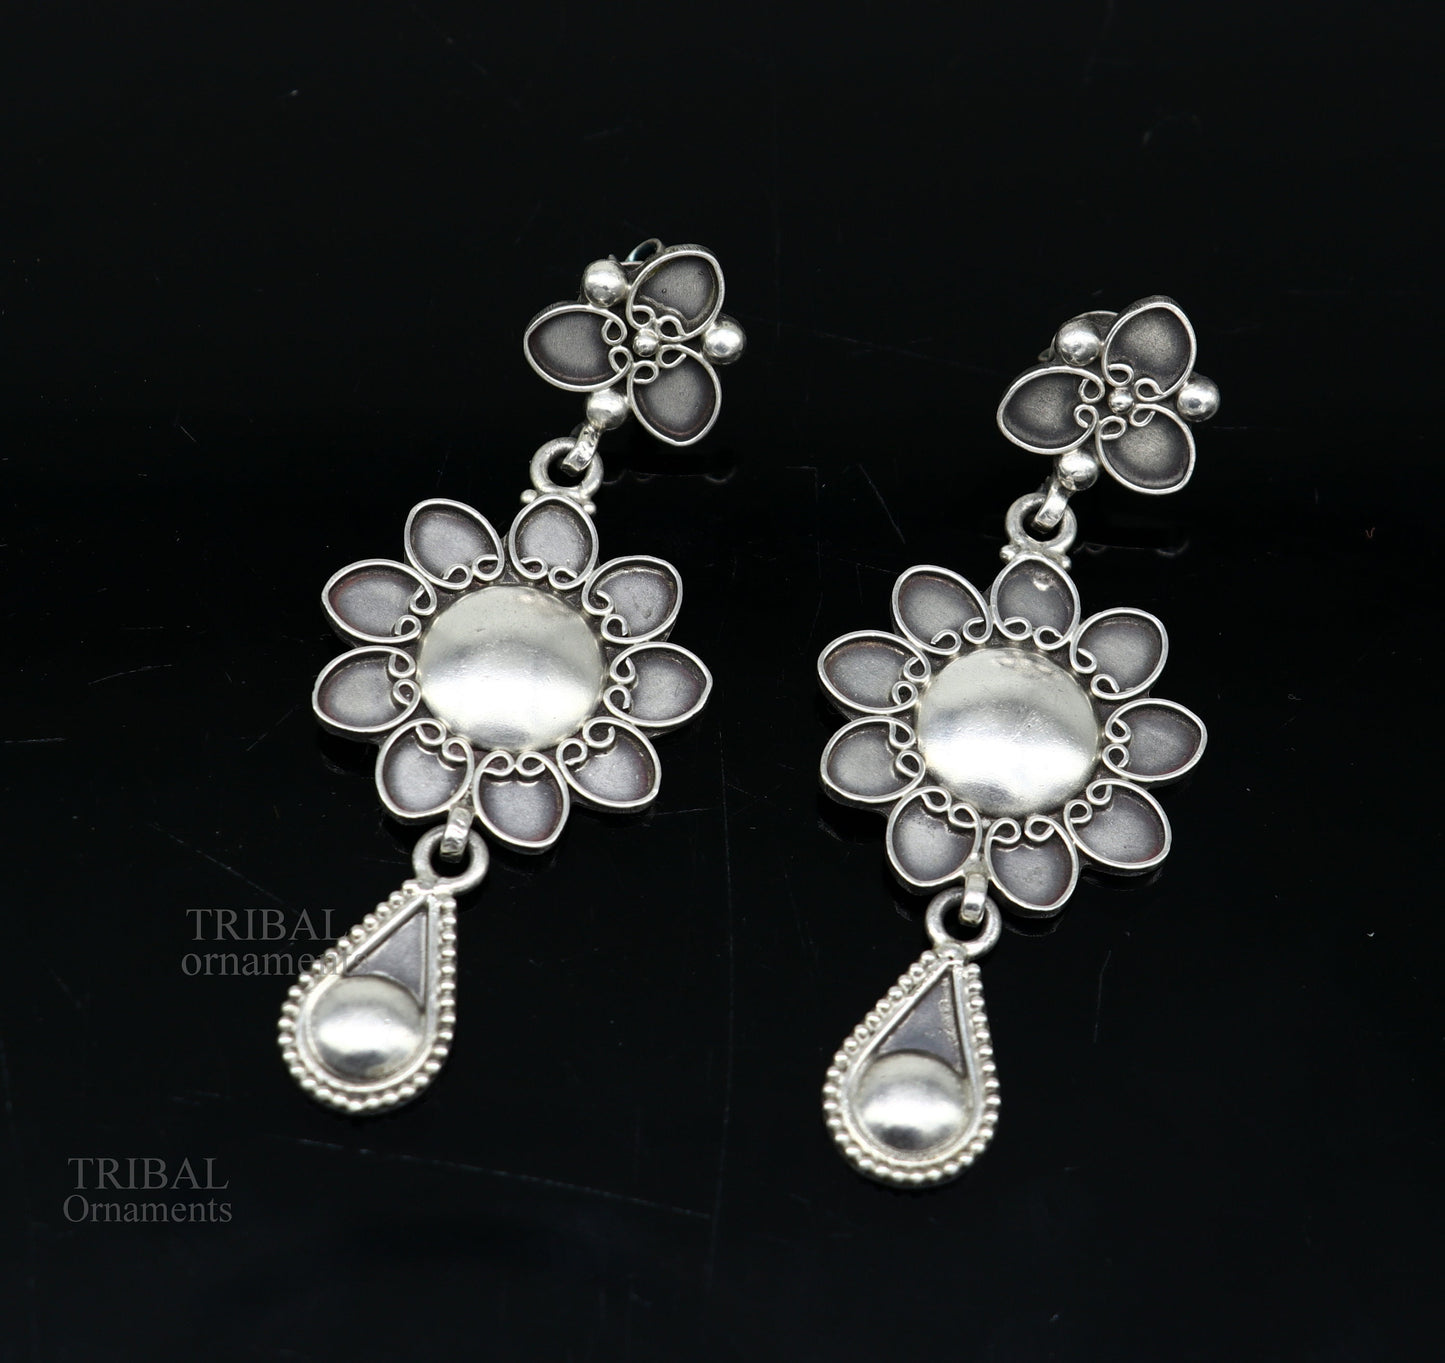 925 sterling silver handmade unique fancy design floral stud earring attractive gifting jewelry, tribal earring drop dangle ear1109 - TRIBAL ORNAMENTS